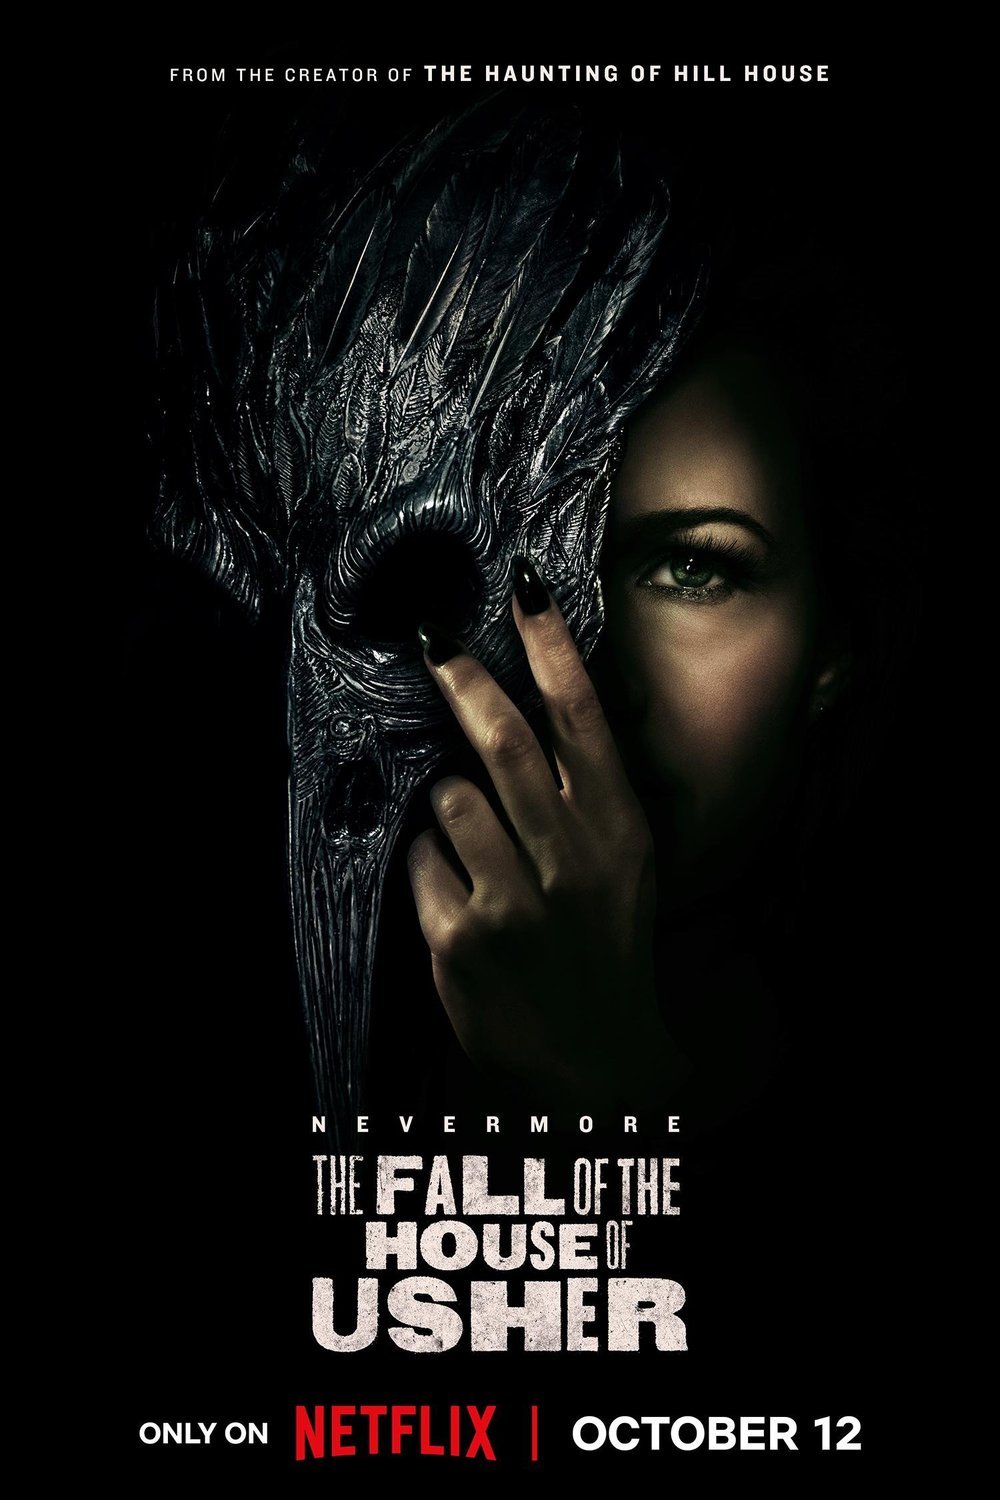 Poster of the movie The Fall of the House of Usher